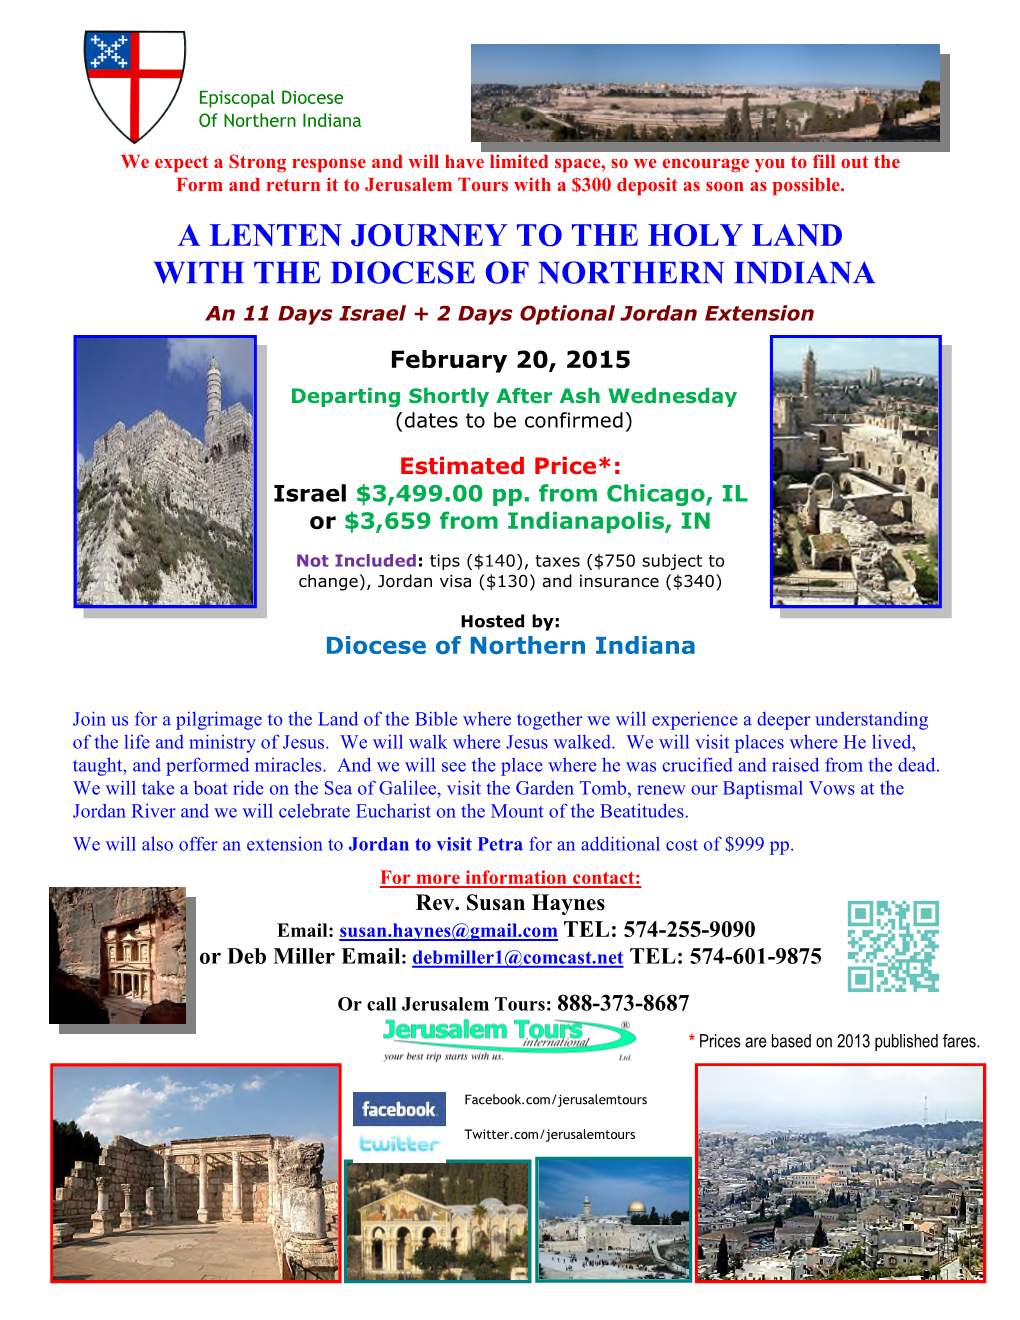 A LENTEN JOURNEY to the HOLY LAND with the DIOCESE of NORTHERN INDIANA an 11 Days Israel + 2 Days Optional Jordan Extension